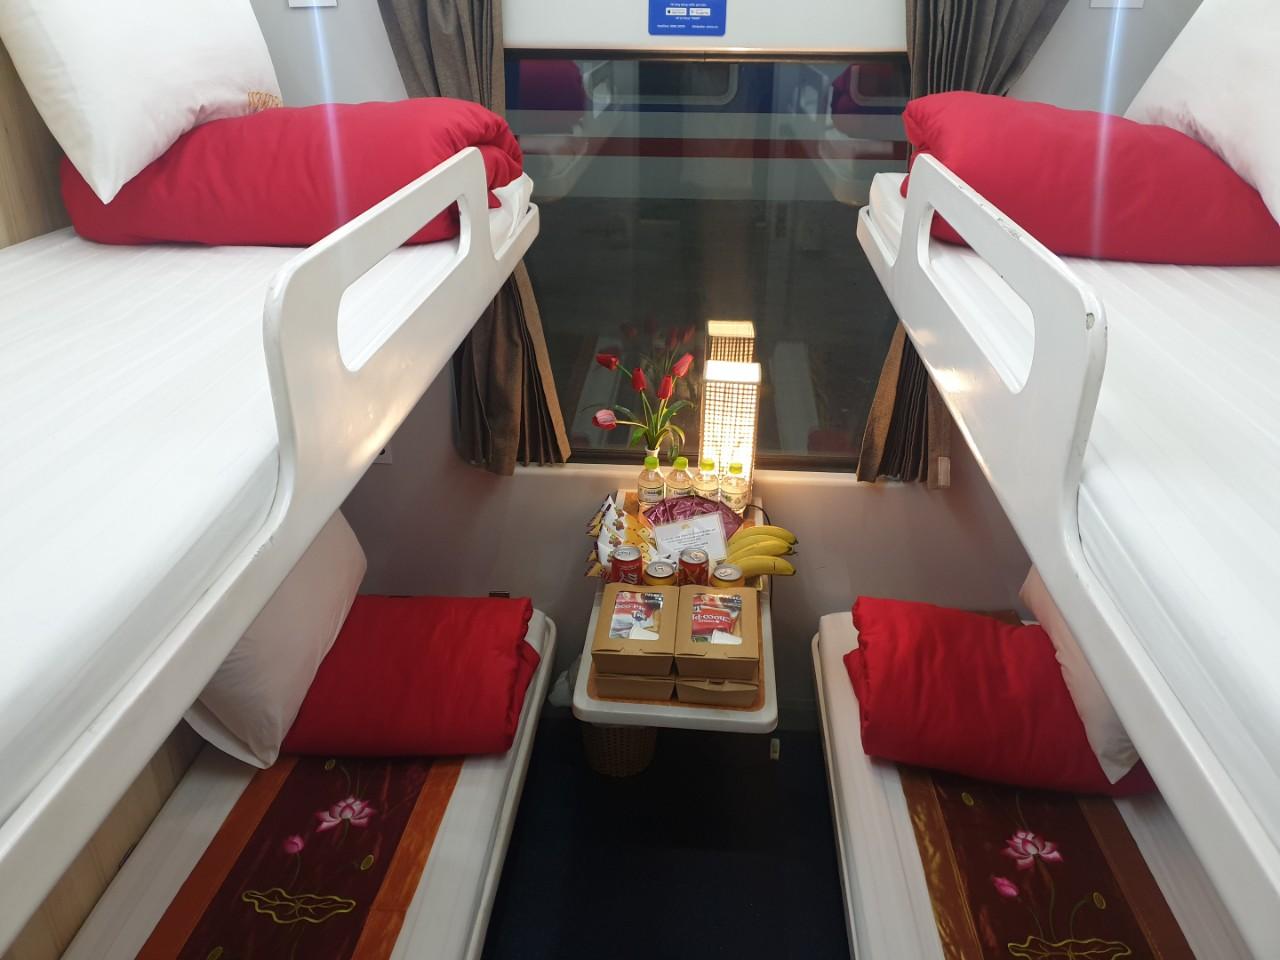 Ha Noi – Hue on SE19 (20h10 – 09h20) Only available from 07 Feb 2023